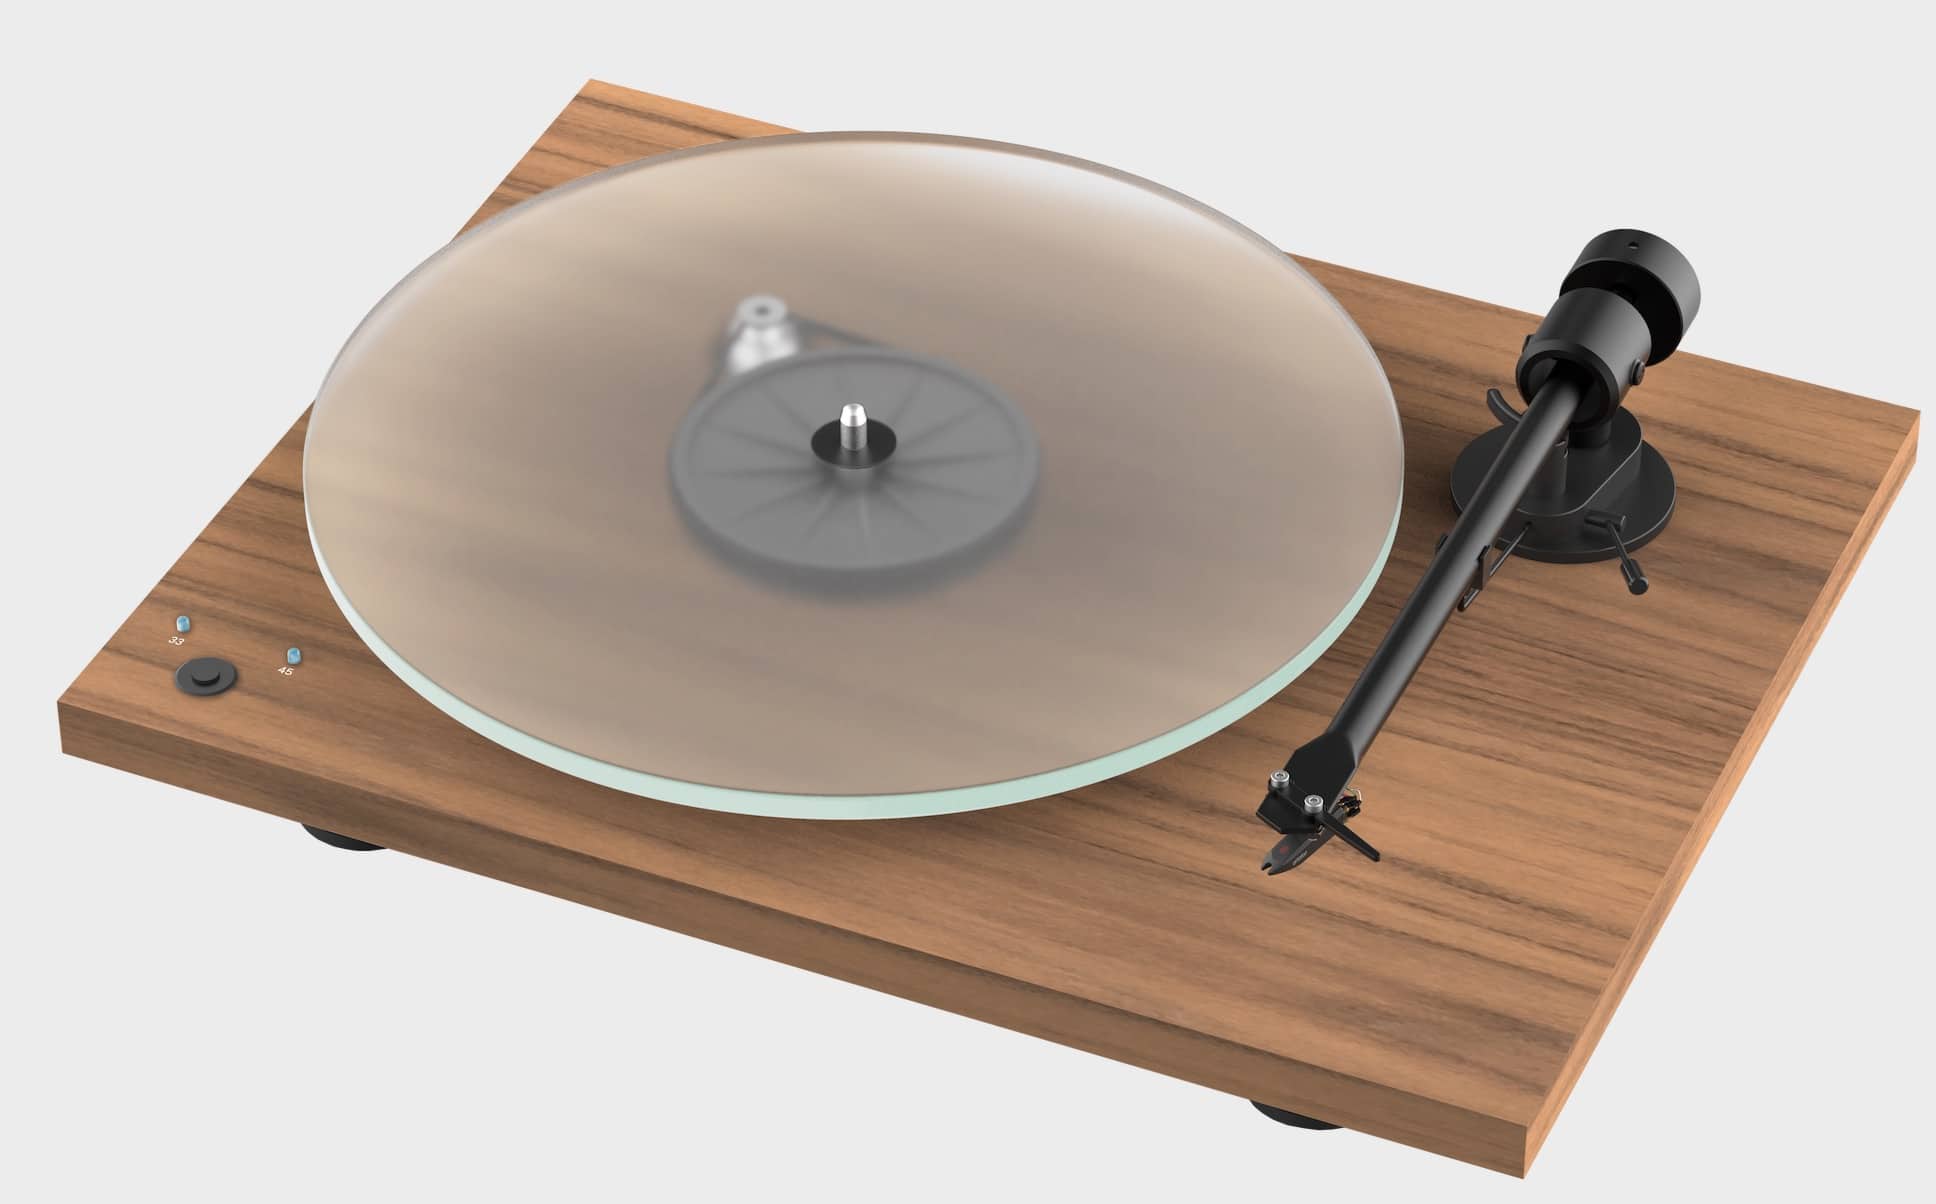 T1 Budget Turntable From Pro-Ject